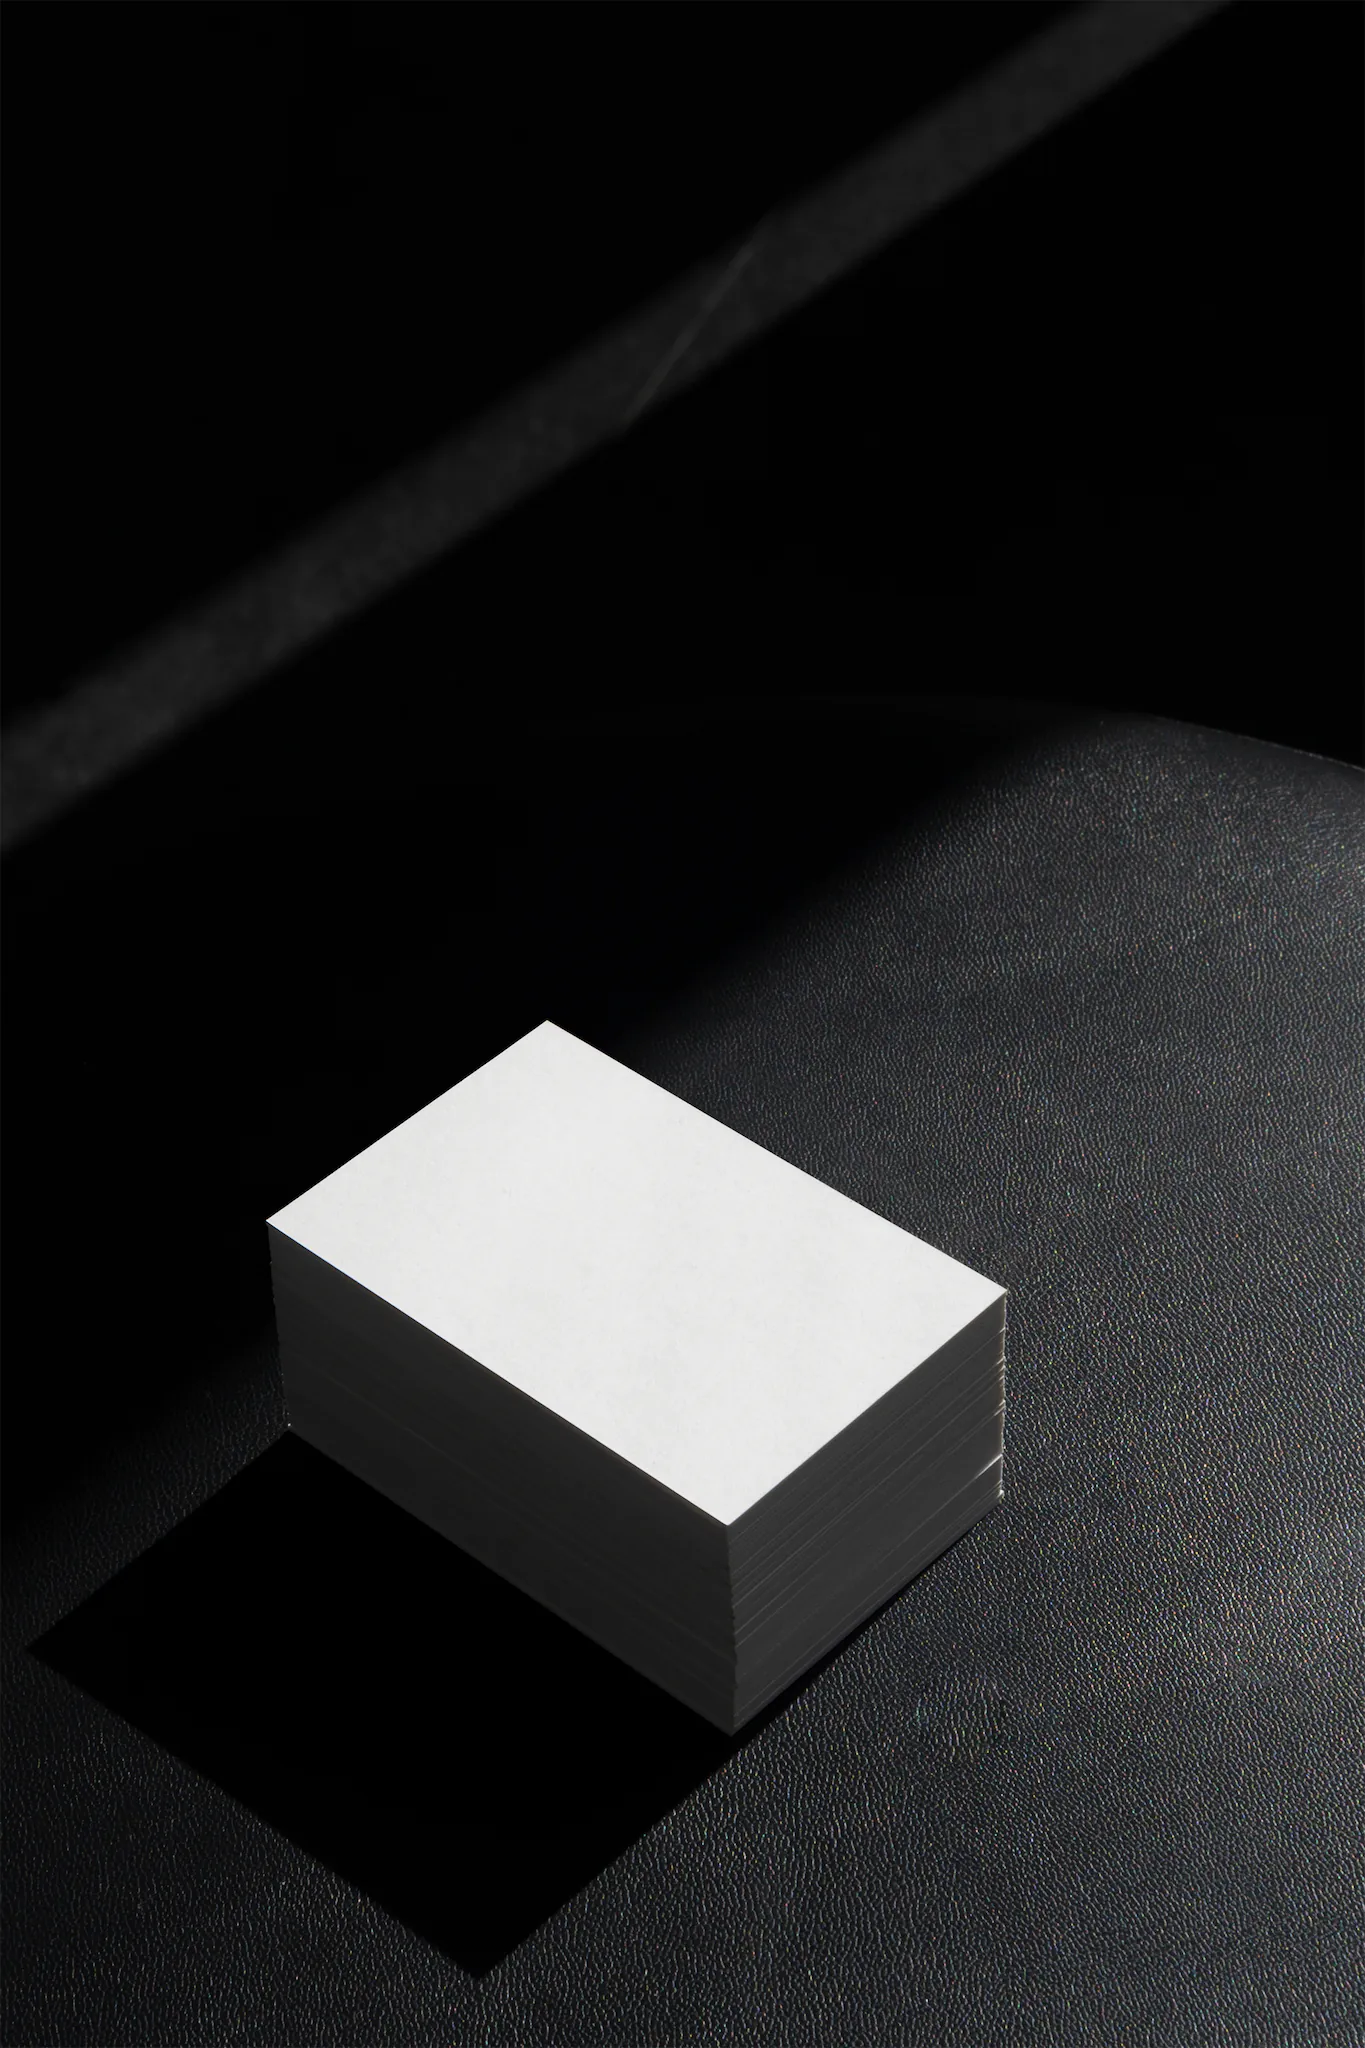 Block of business cards mockup on top of a black leather surface. Branding mockup.